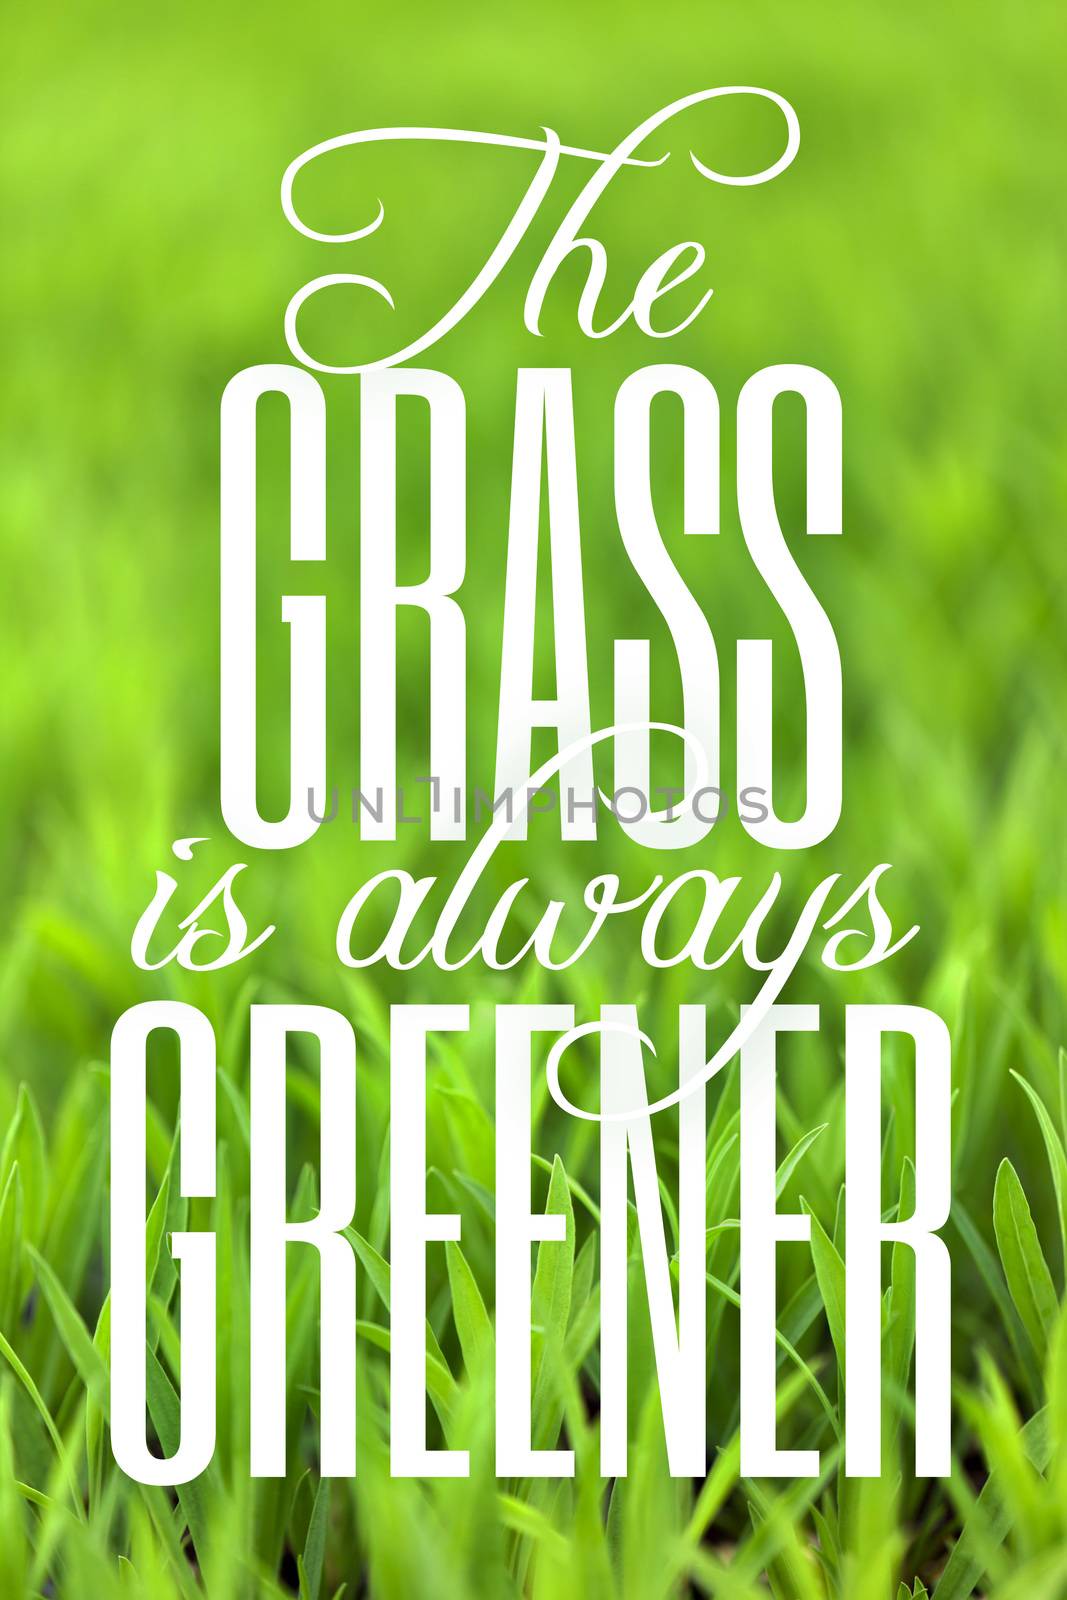 Green grass with typography quote about the grass always being greener on the other side.